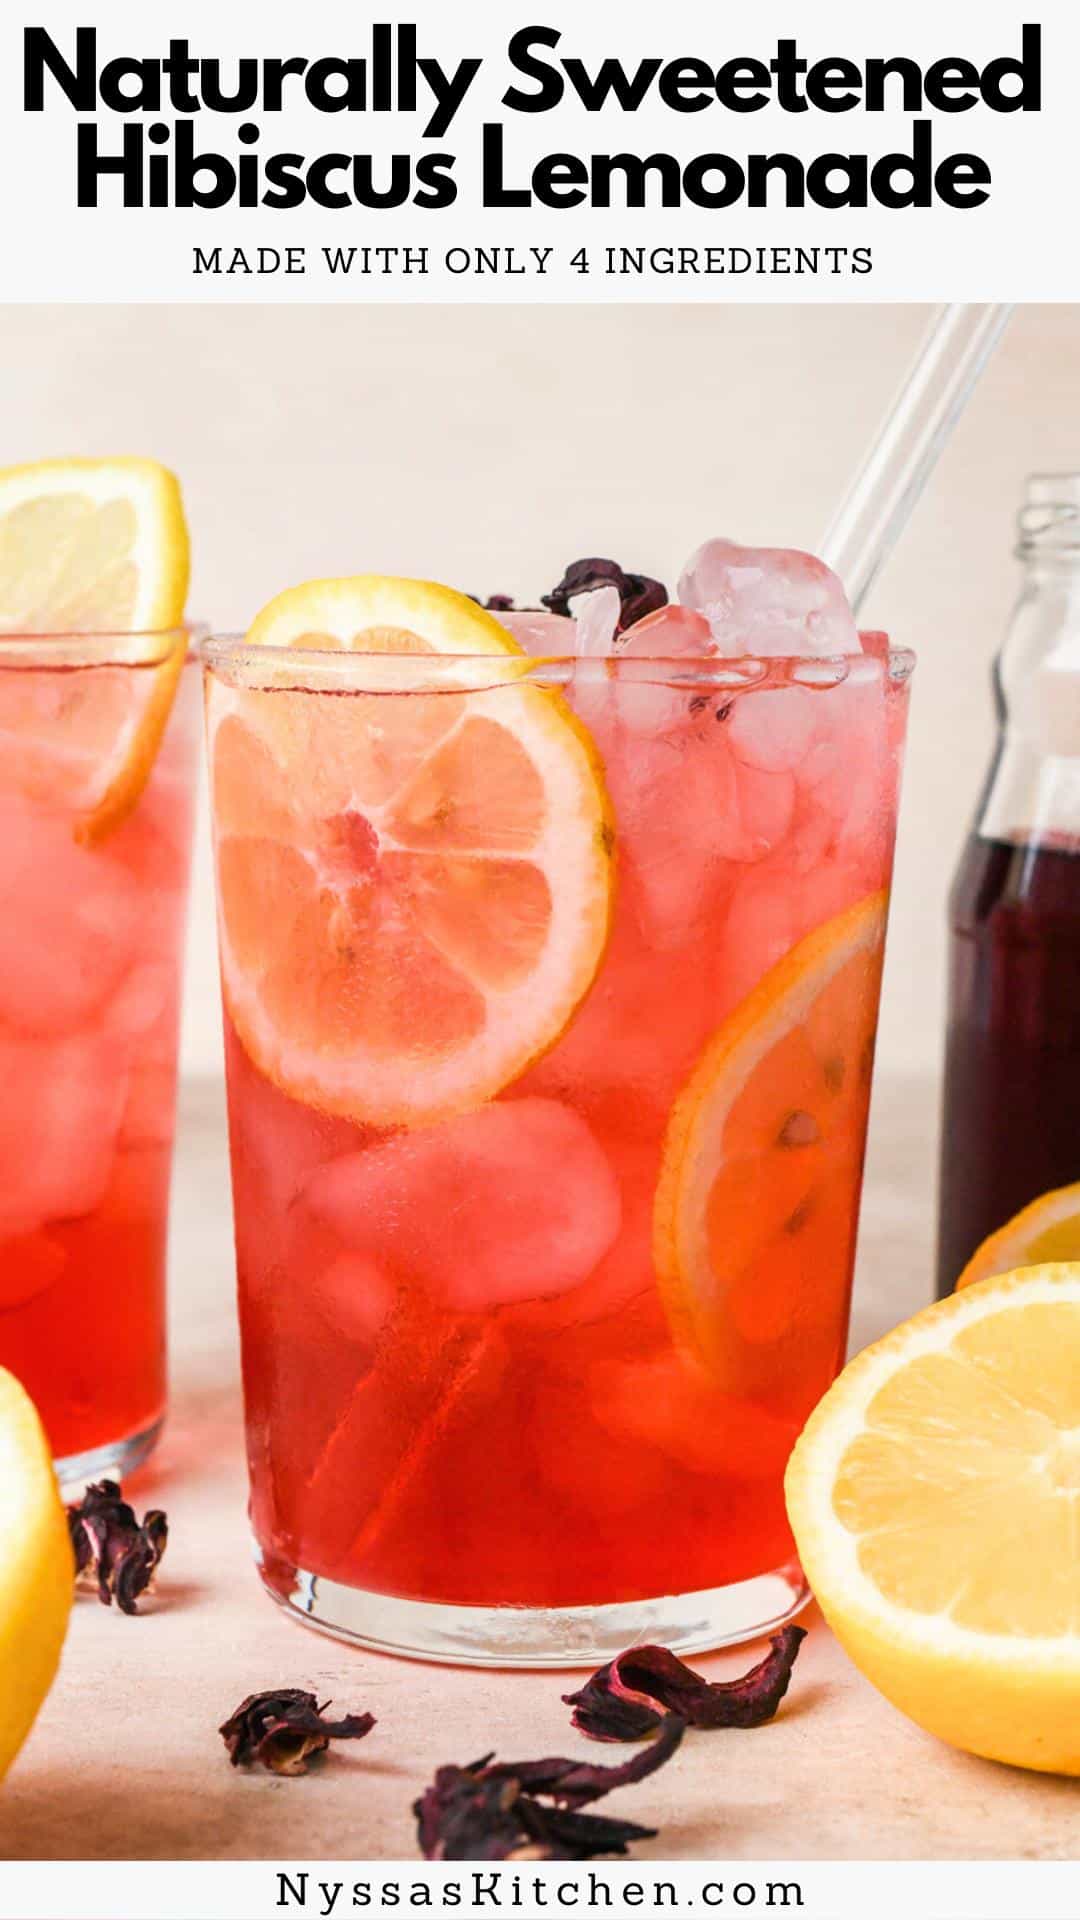 This juicy and refreshing 4-ingredient hibiscus lemonade is made with an irresistible blend of naturally sweetened homemade hibiscus syrup and fresh lemon juice. Ready in less than 30 minutes and easy to make ahead for a family get together, summer BBQ, or weekend party! The perfect non-alcoholic drink to enjoy throughout the warmer months of the year.